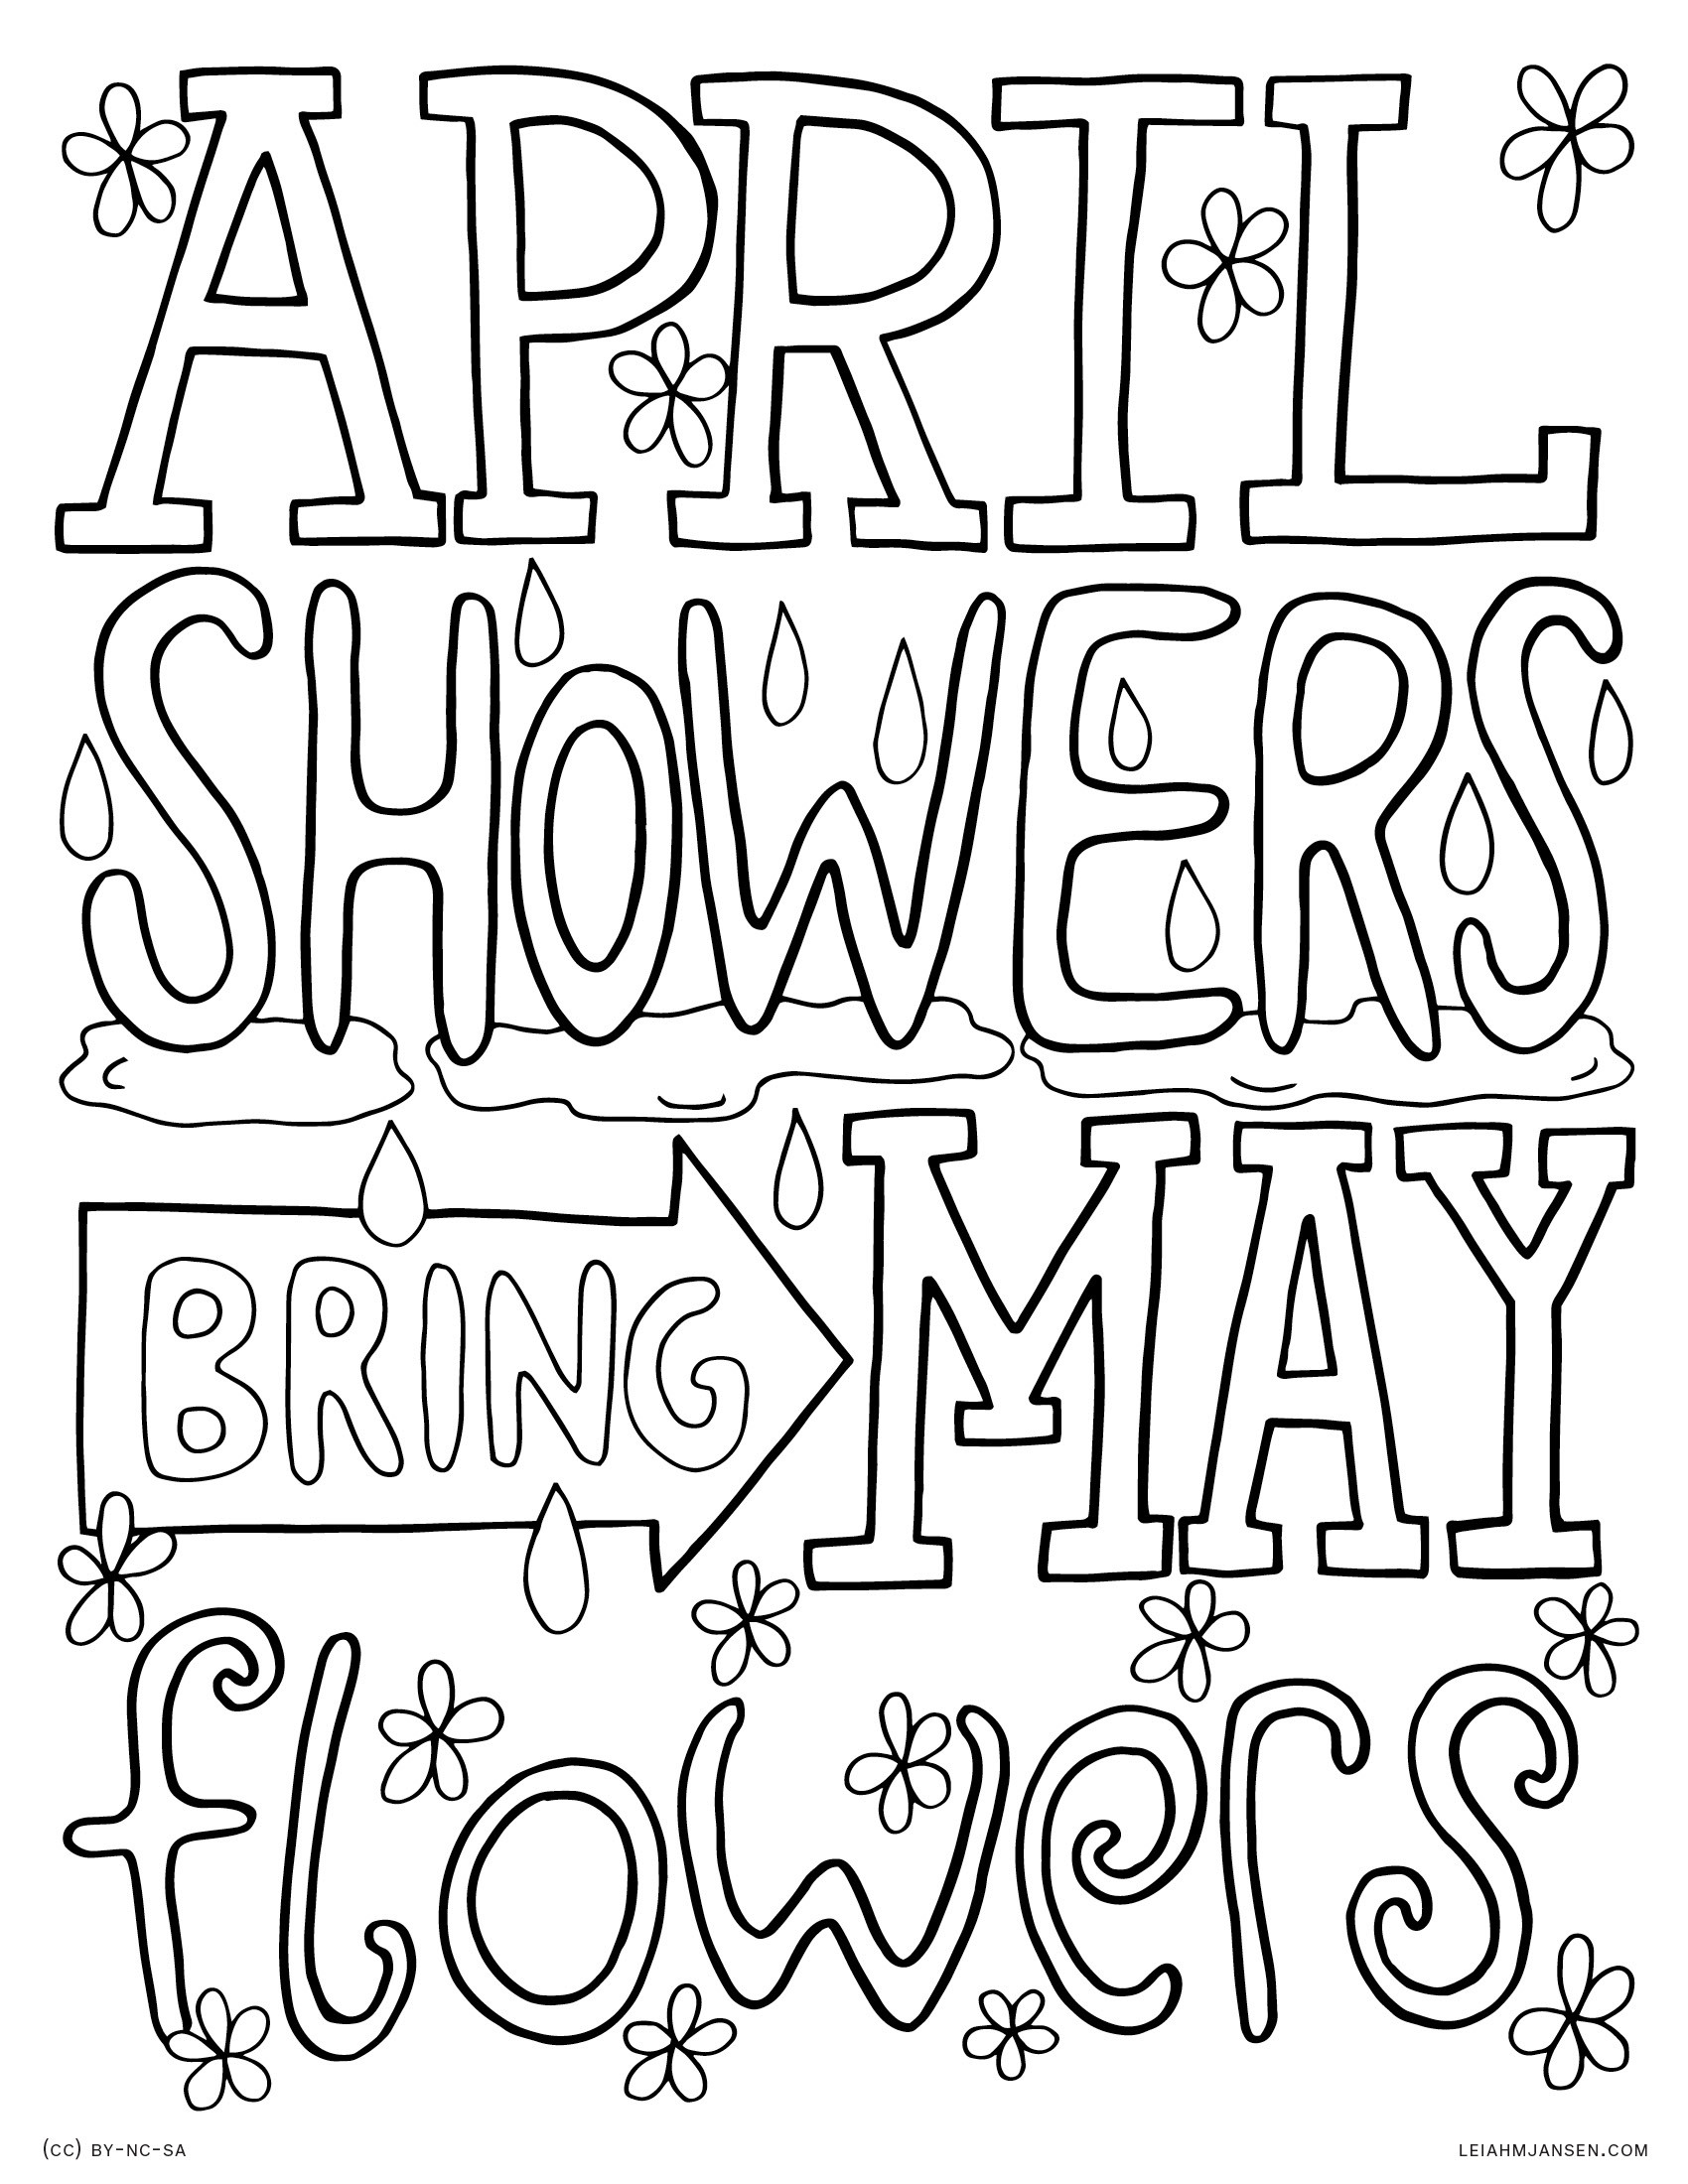 April Showers Coloring Pages
 Coloring Pages